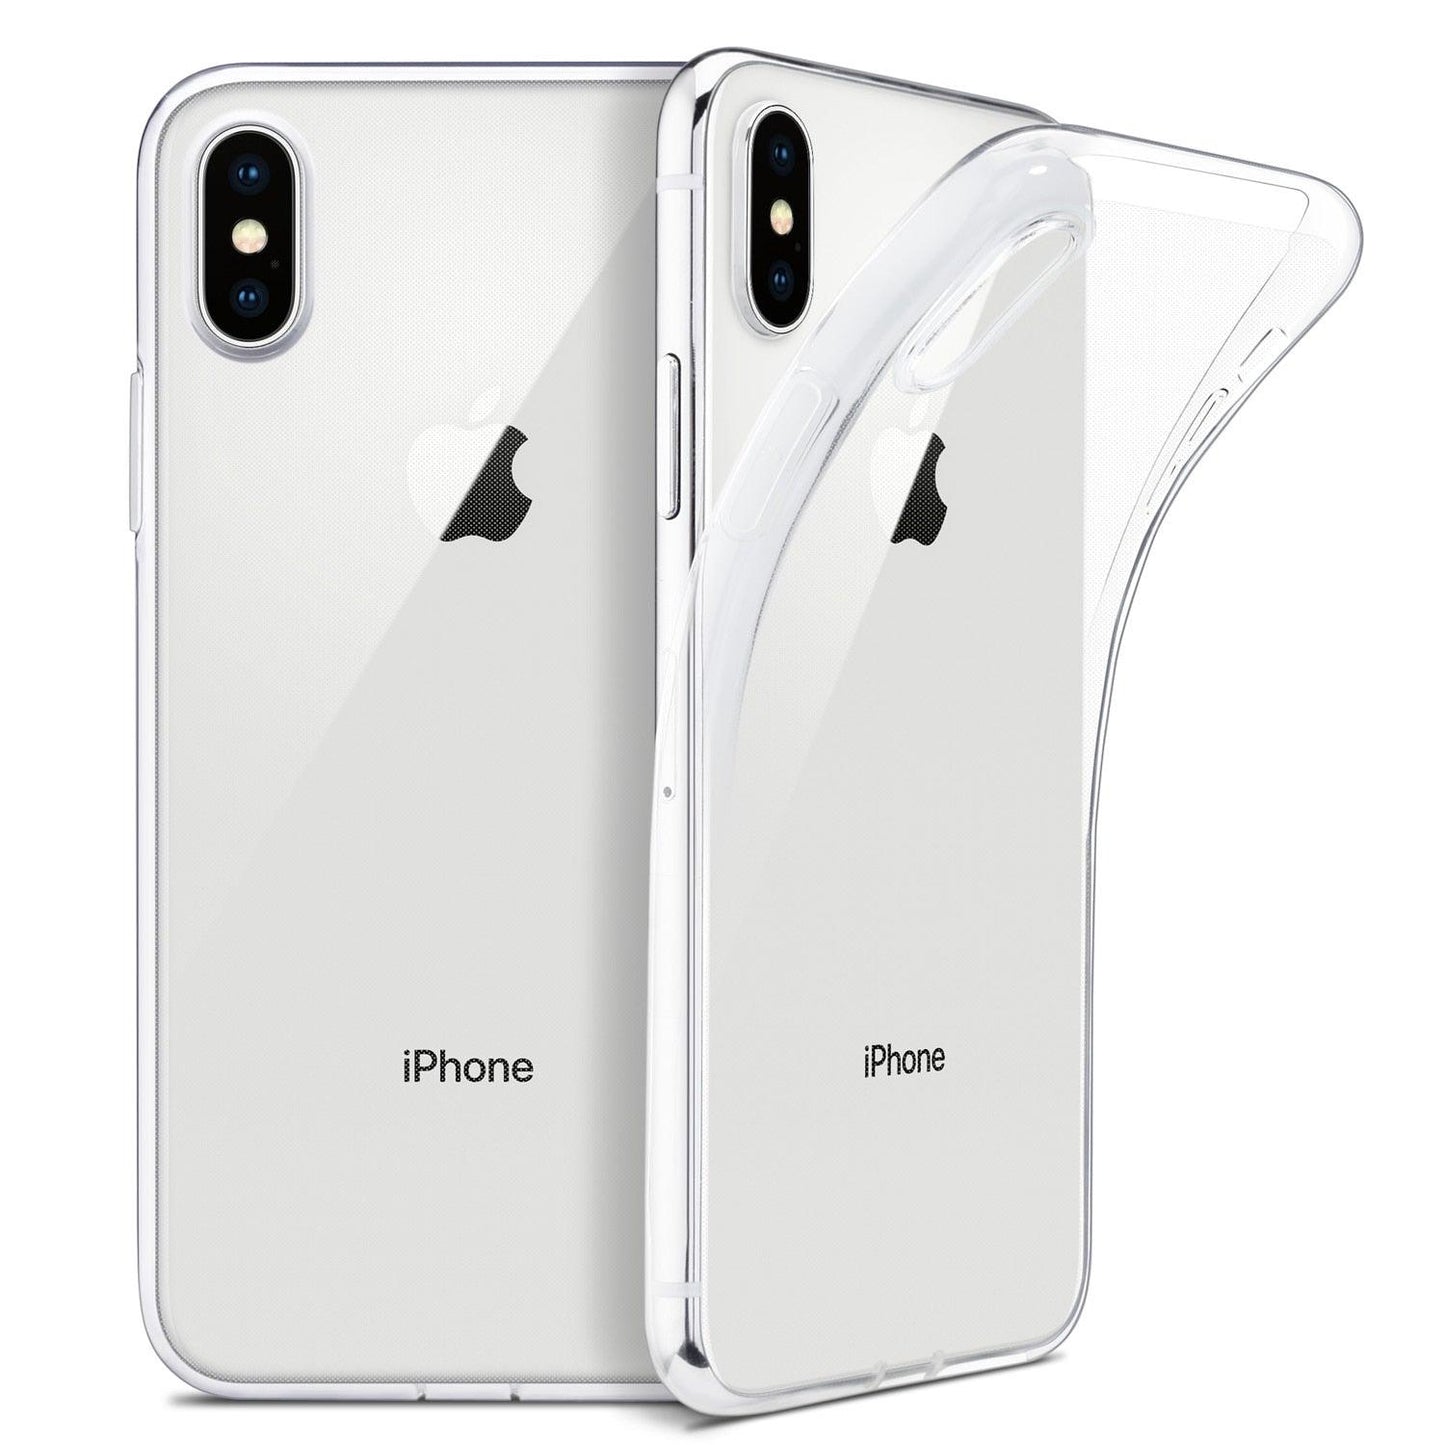 Ultra Slim Transparent Fitted Case For iPhone Soft TPU Clear Protective Cover For Apple 5.8" iPhone X / iPhone 10 (2017 Release) iPhone 8 7 6 S Plus - i-Phonecases.com